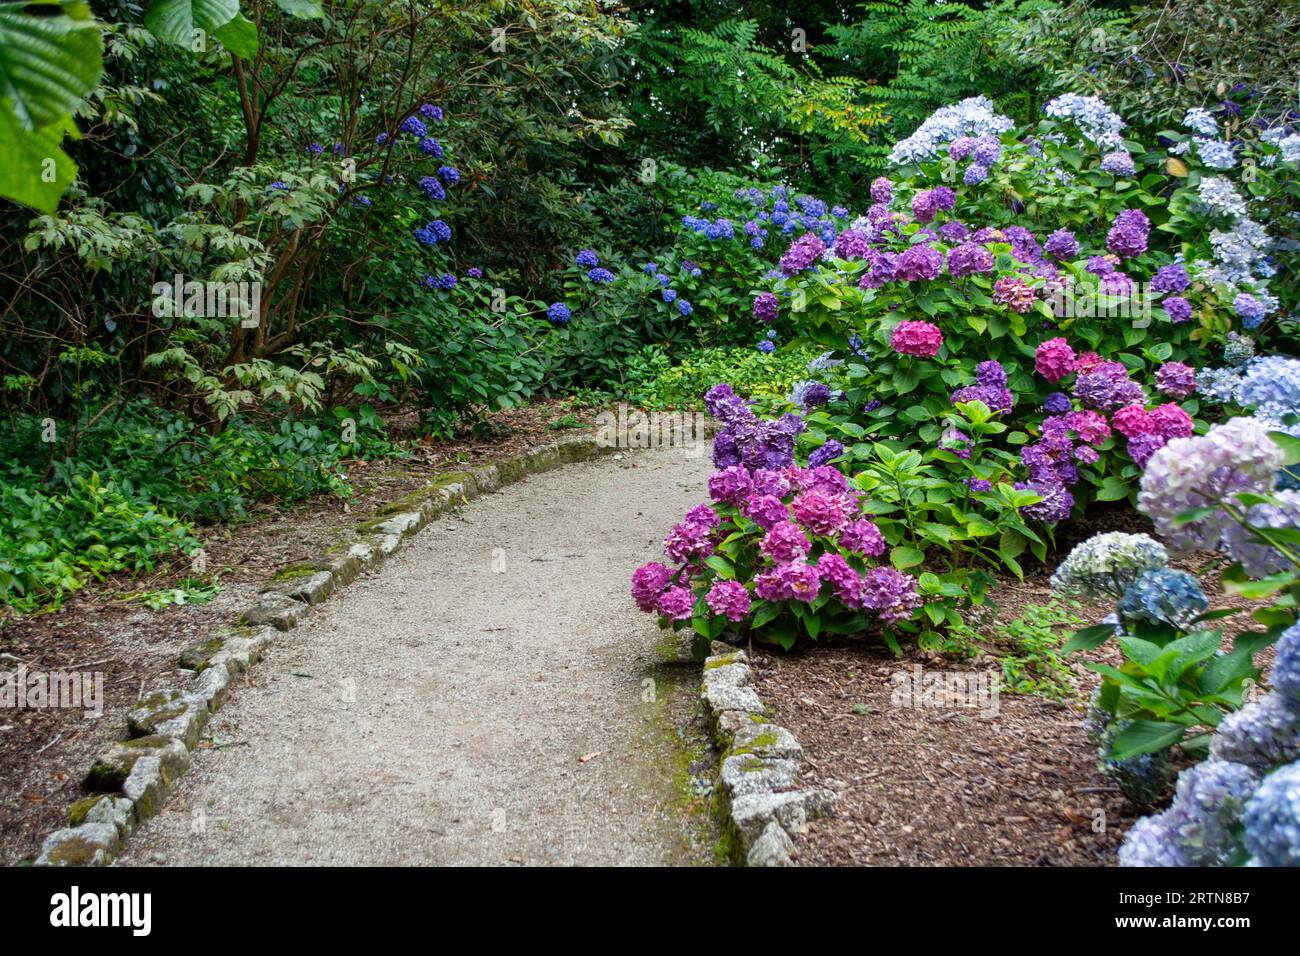 Flowers at Trelissick garden of the National trust, cornwall england uk Stock Photo